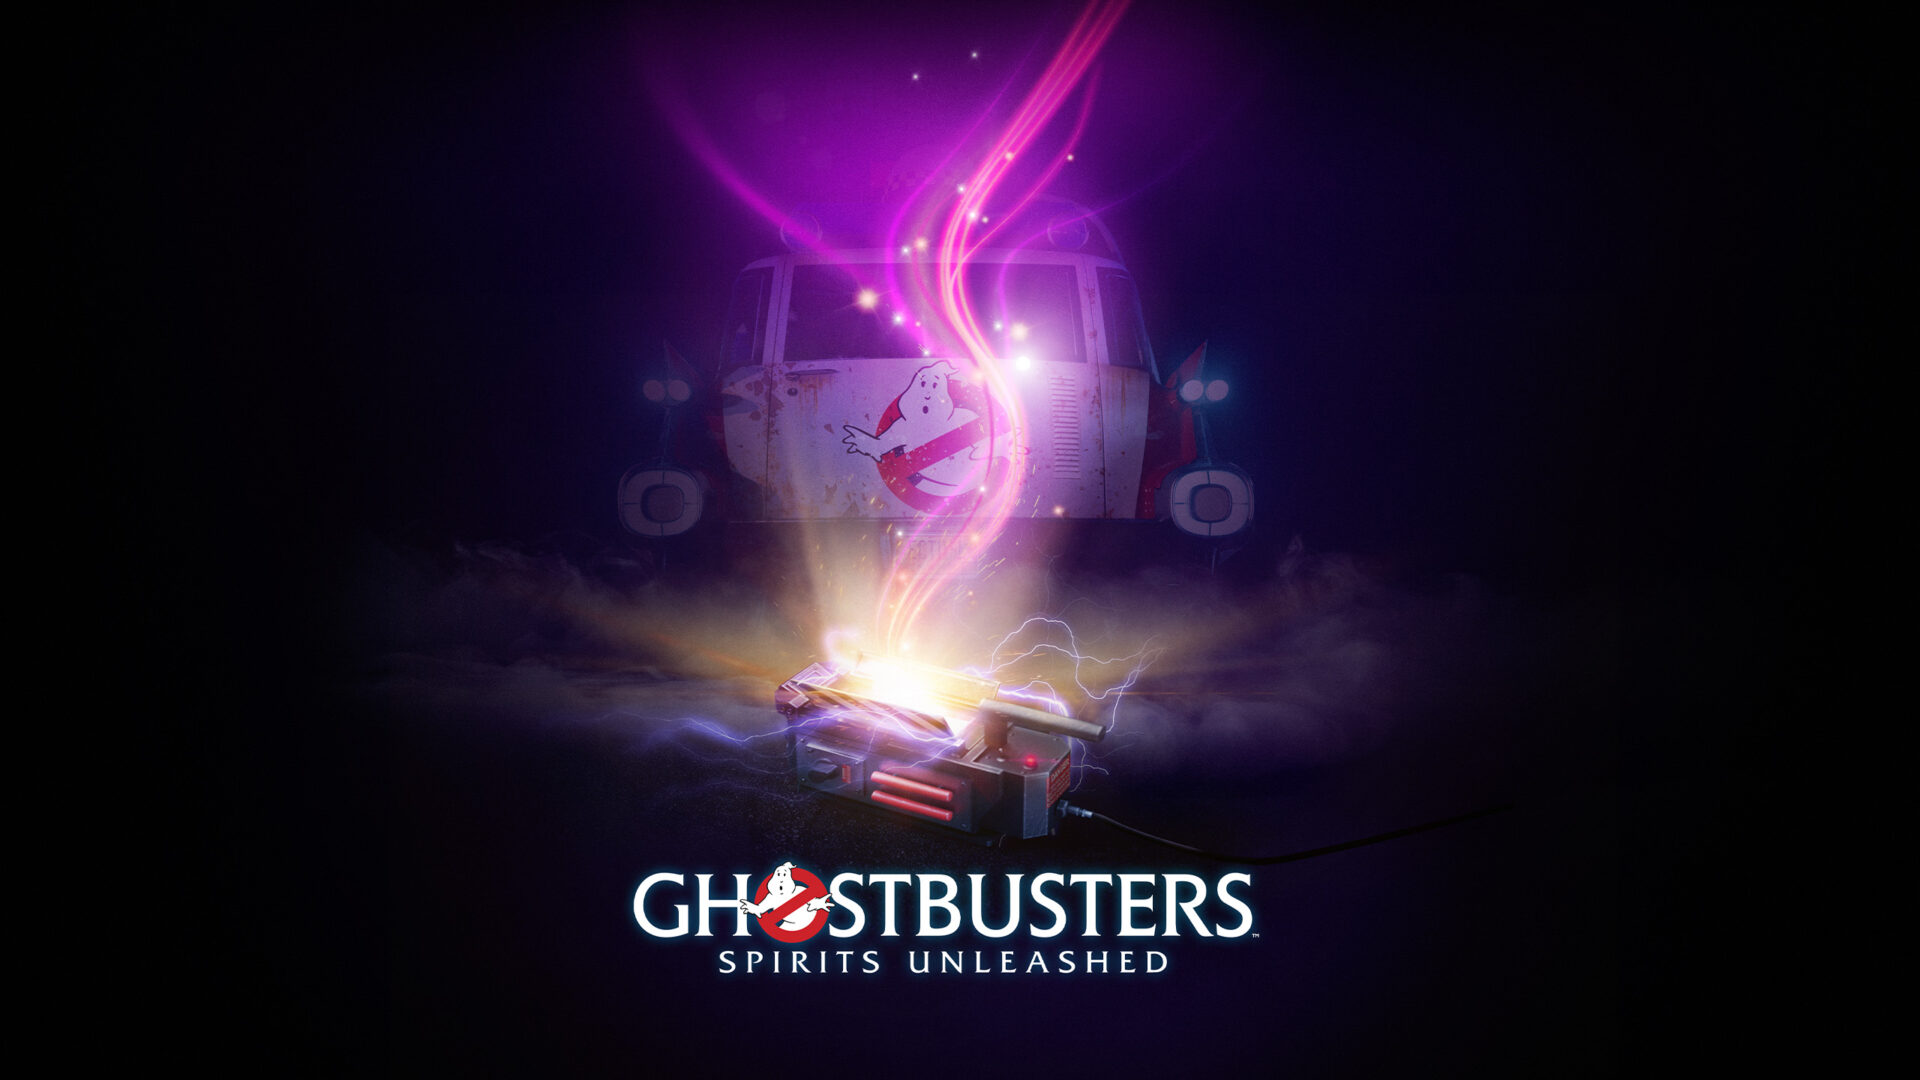 Ghostbusters Spirit Unleashed